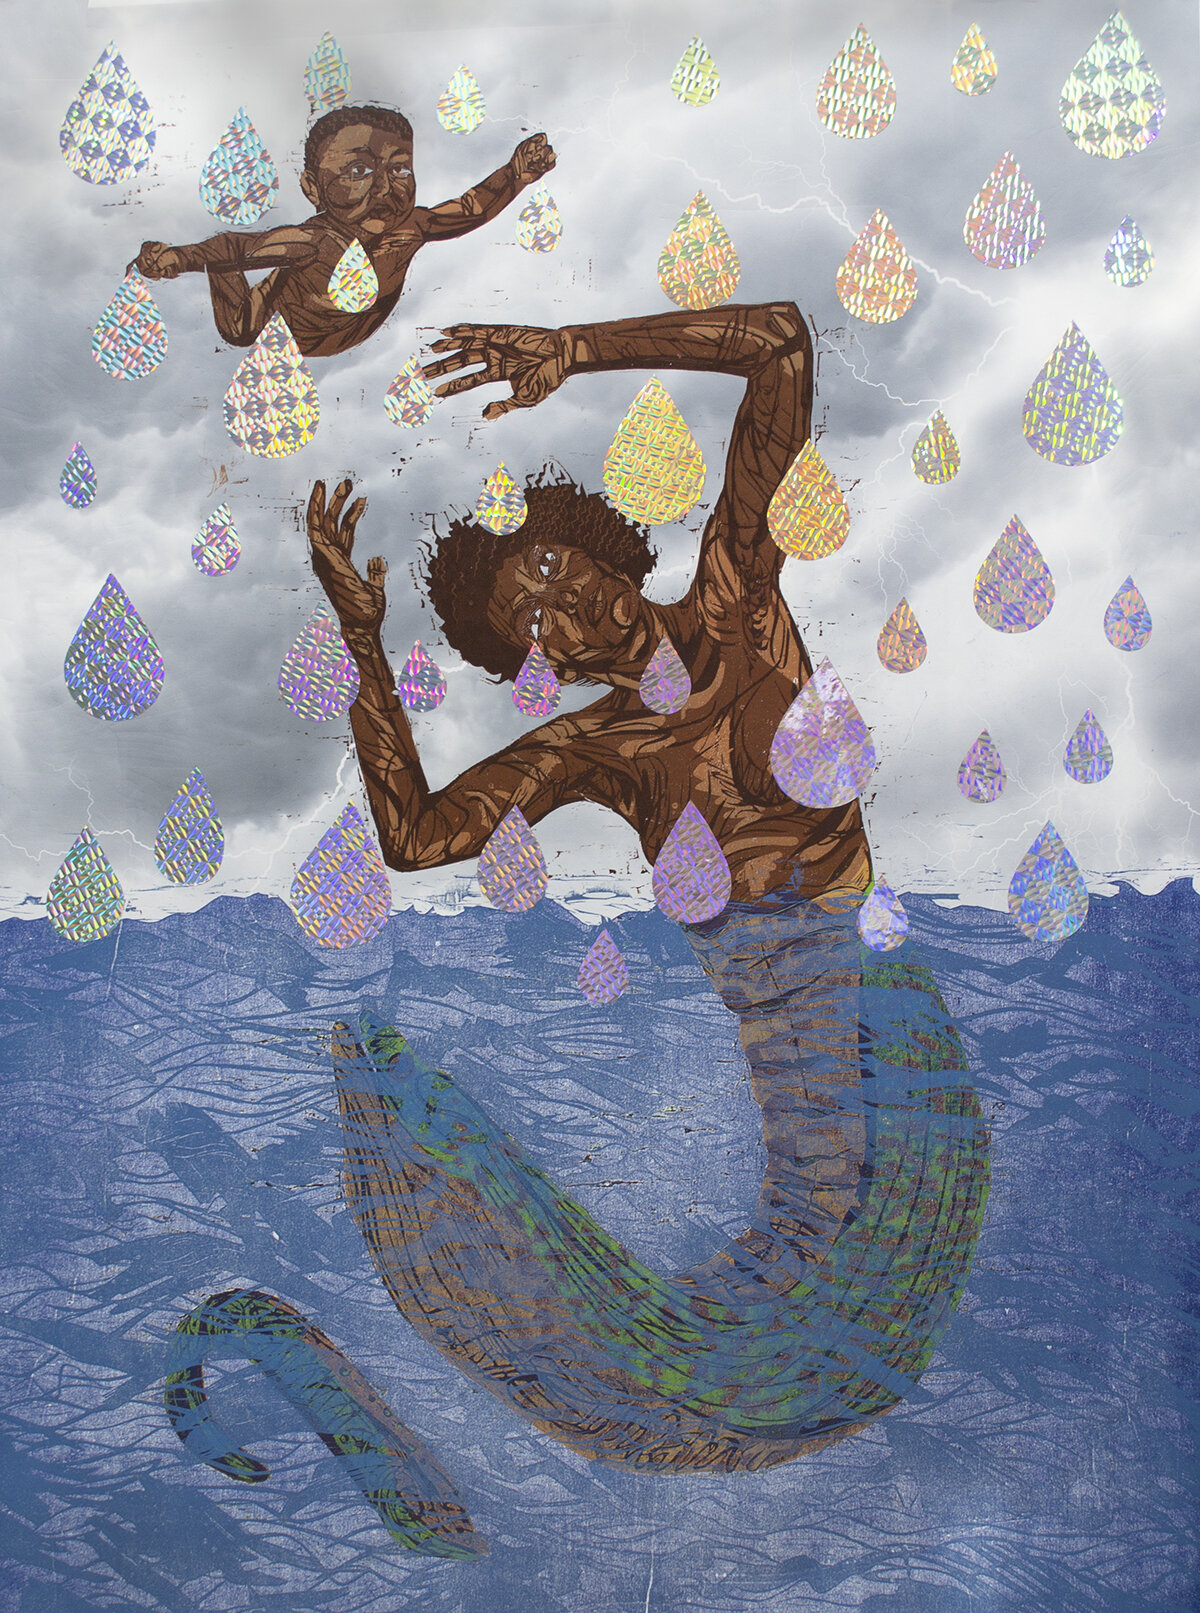 Colorful painting of a brown-skinned mermaid half-submerged in the water, with a nude, brown-skinned baby seemingly floating over her head